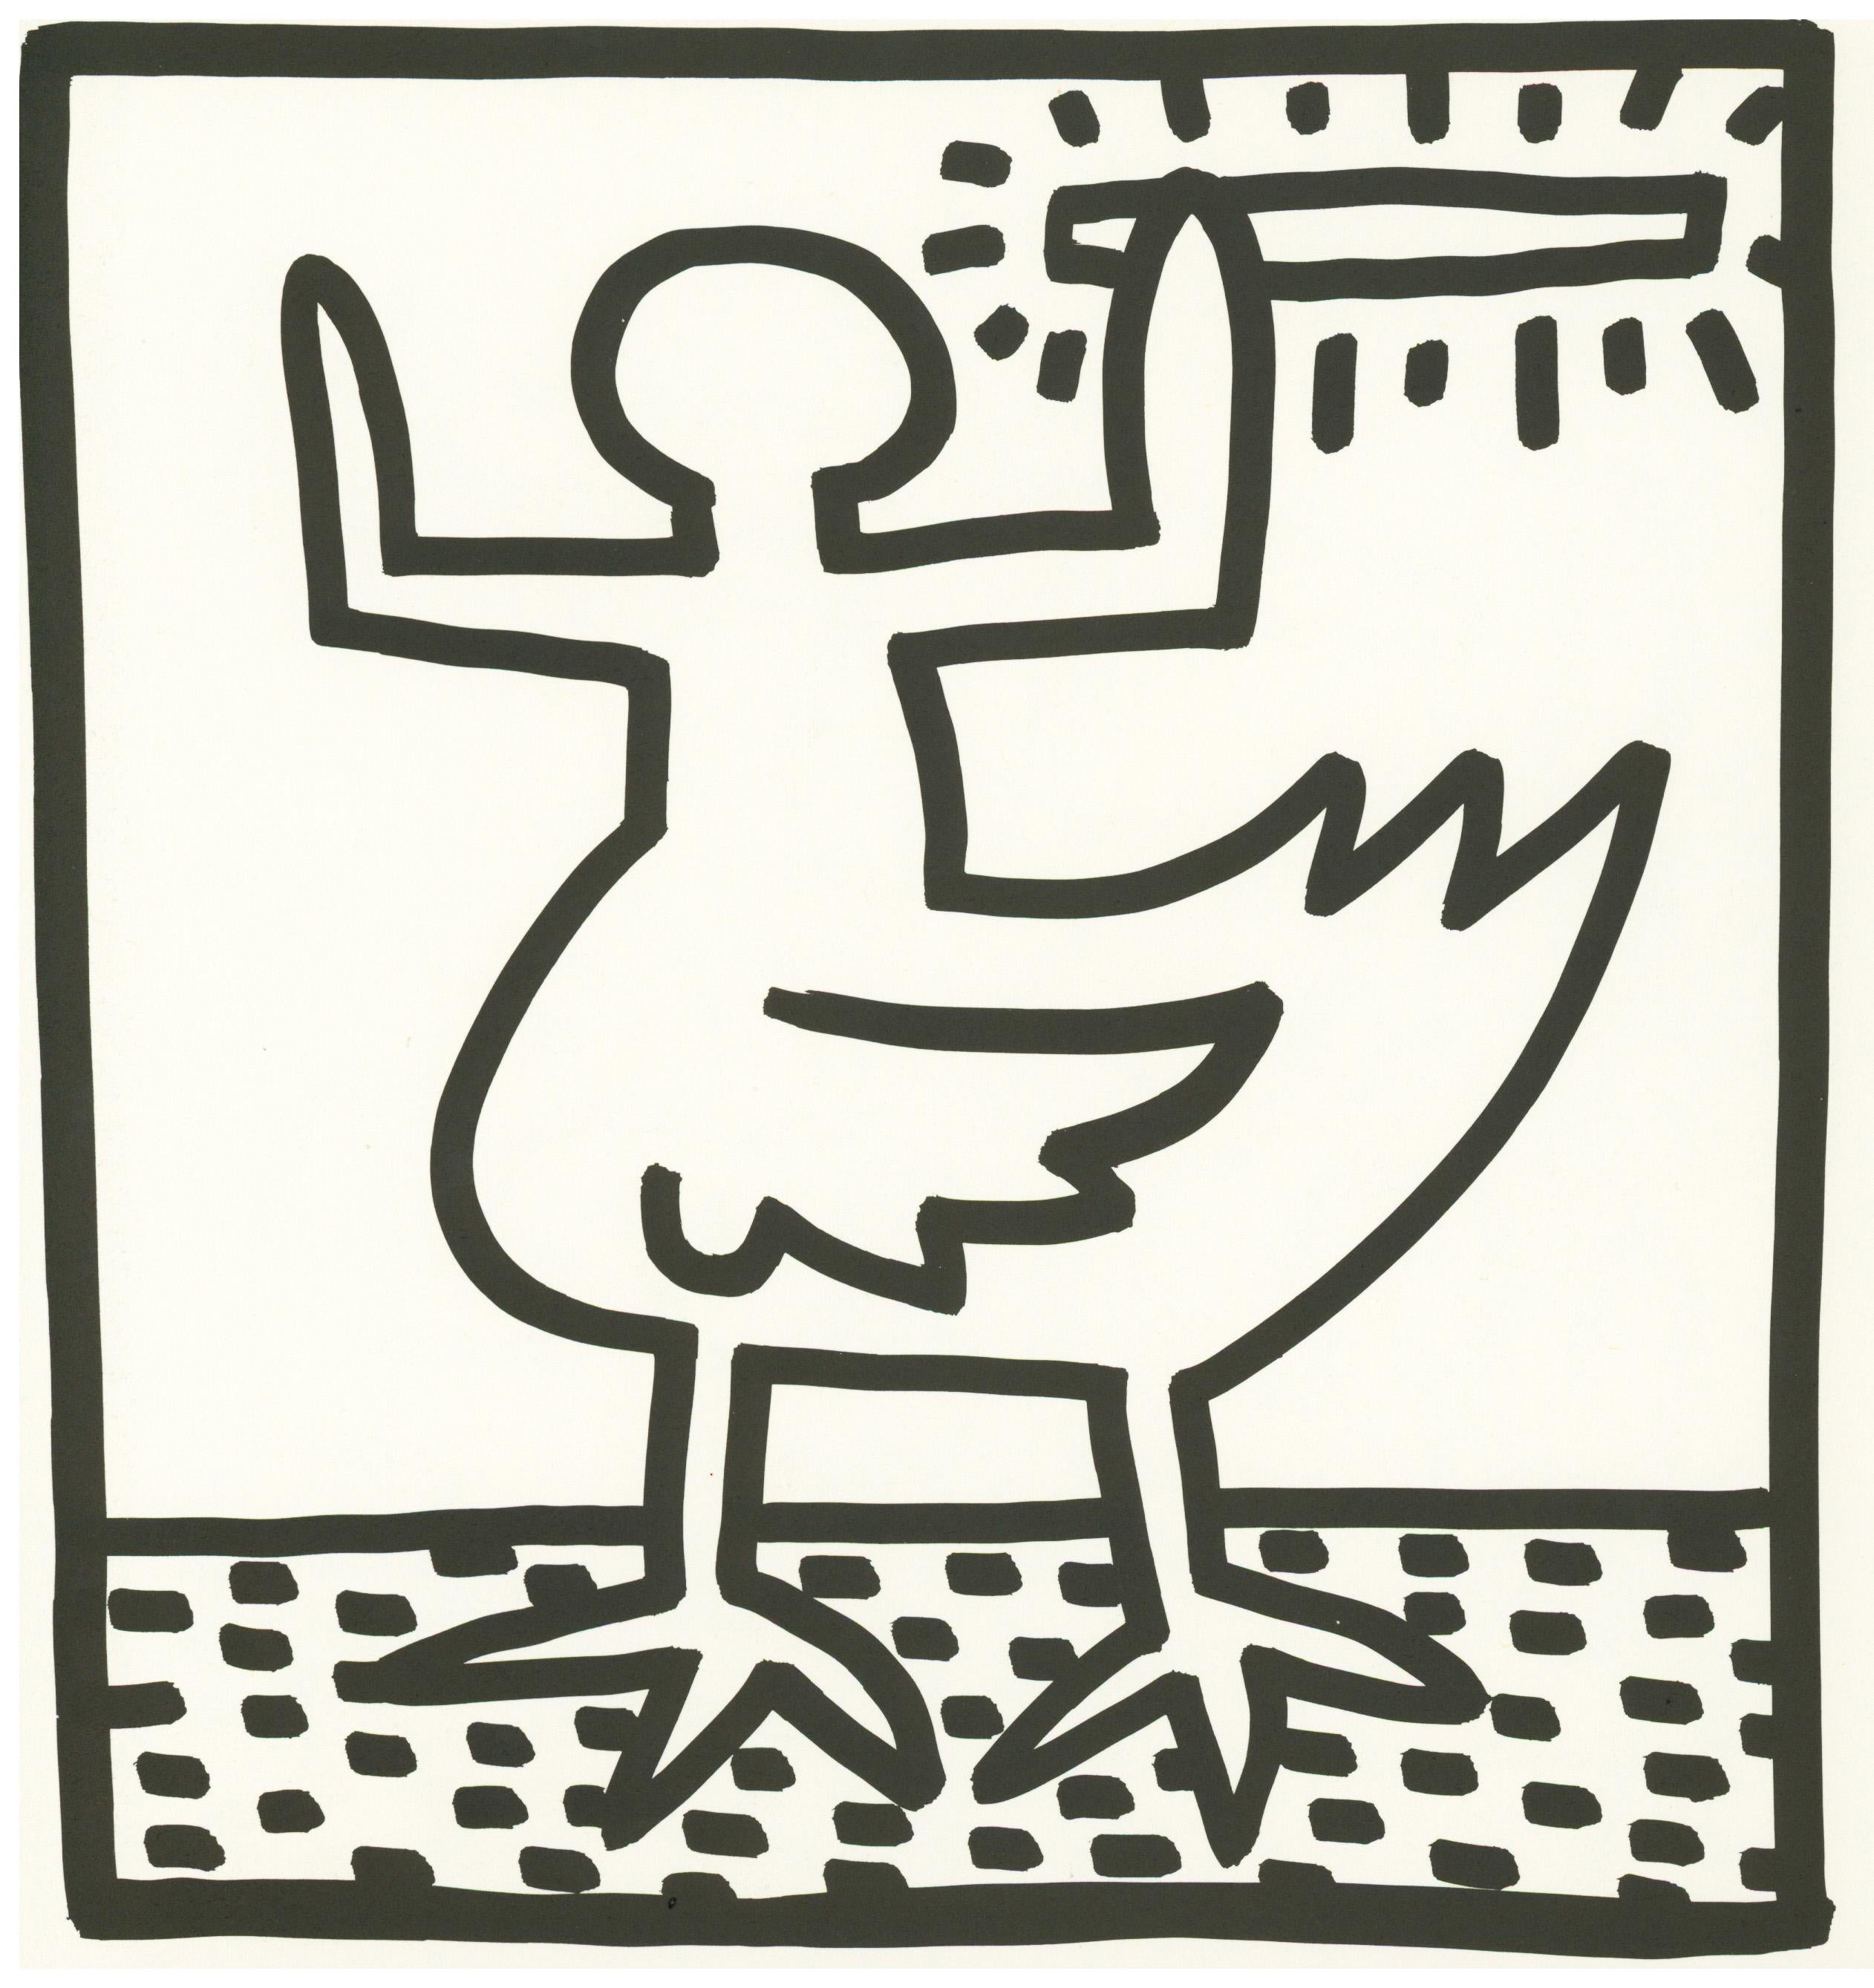 (after) Keith Haring Animal Print - Keith Haring (untitled) Duck lithograph 1982 (Keith Haring prints) 